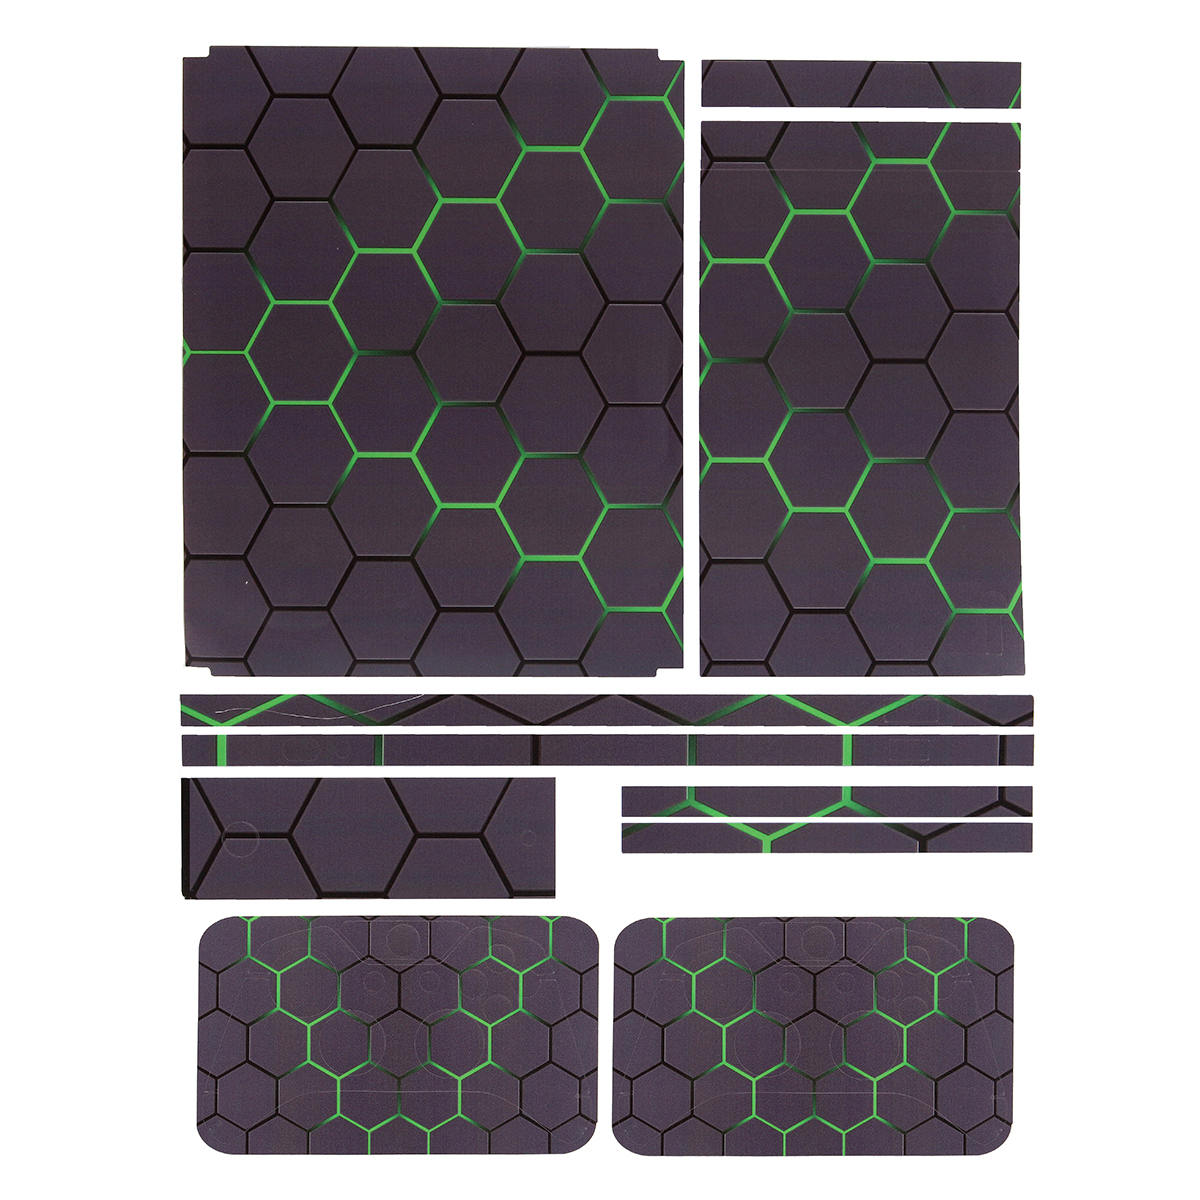 Green Grid Vinyl Decal Skin Stickers Cover for Xbox One S Game Console&2 Controllers 10